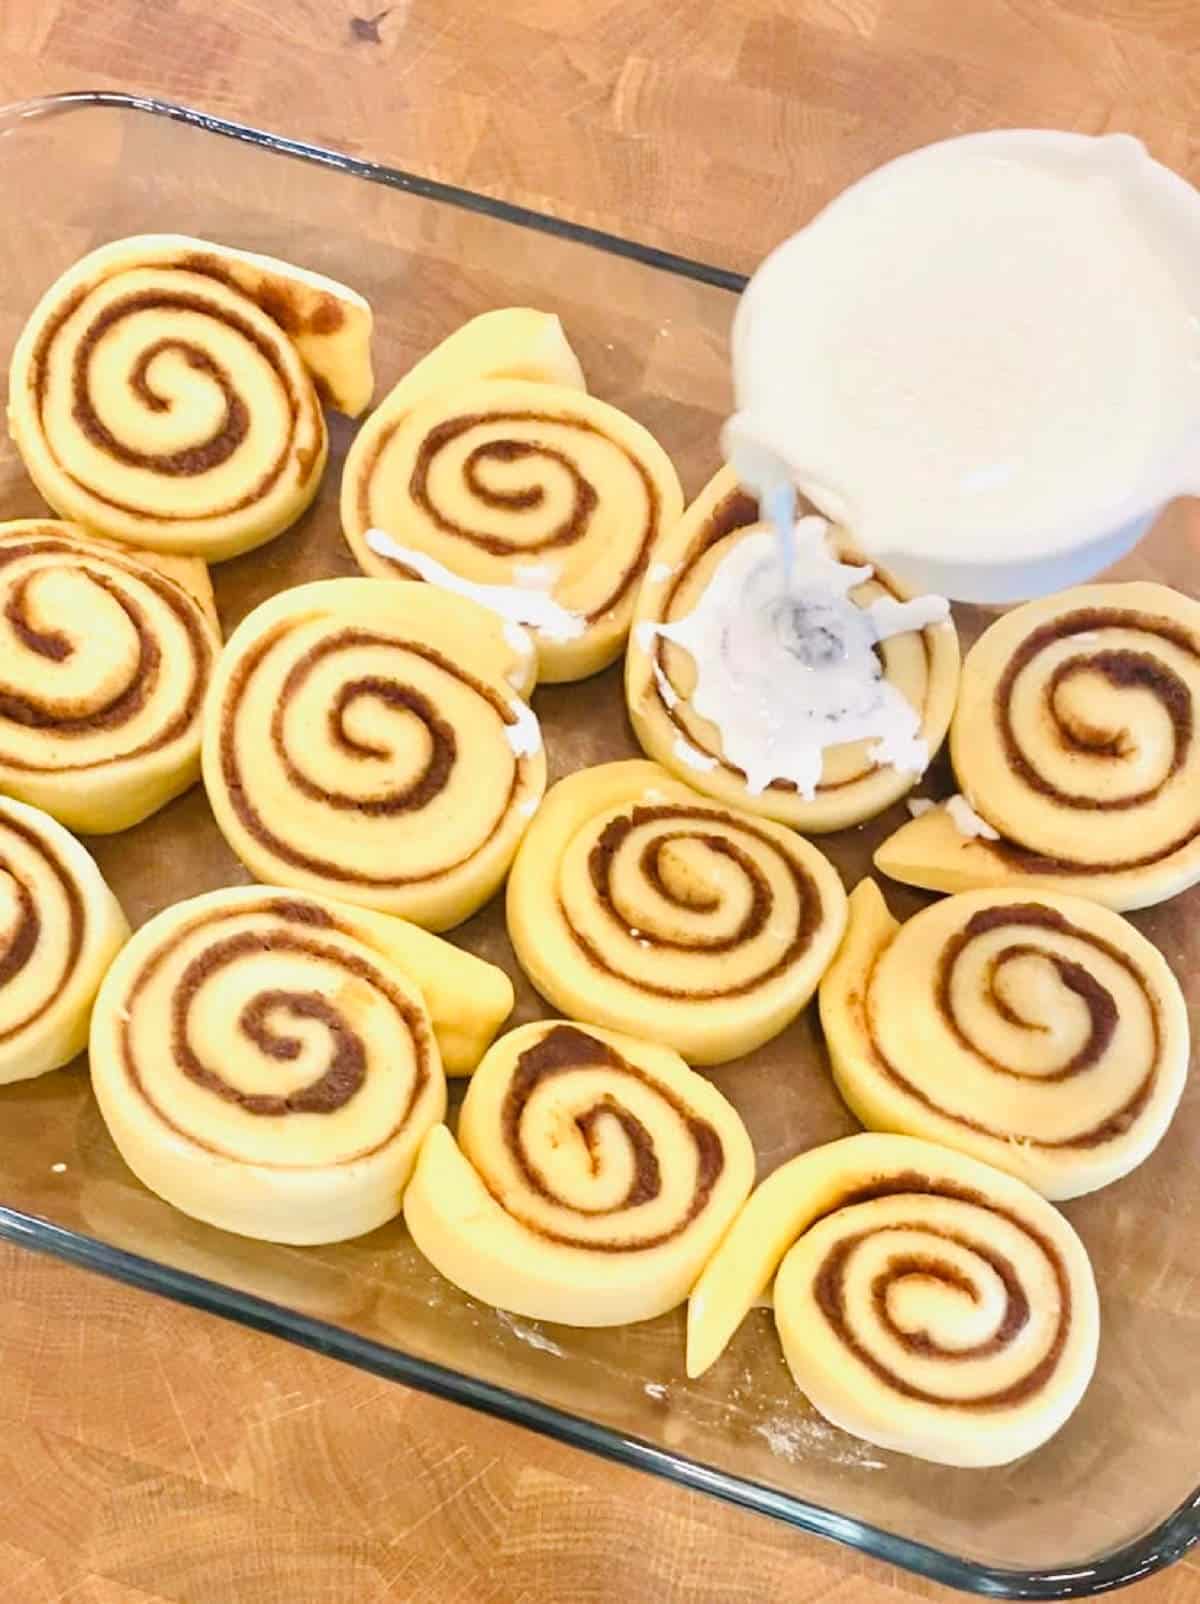 canned cinnamon rolls with heavy cream being poured on top.